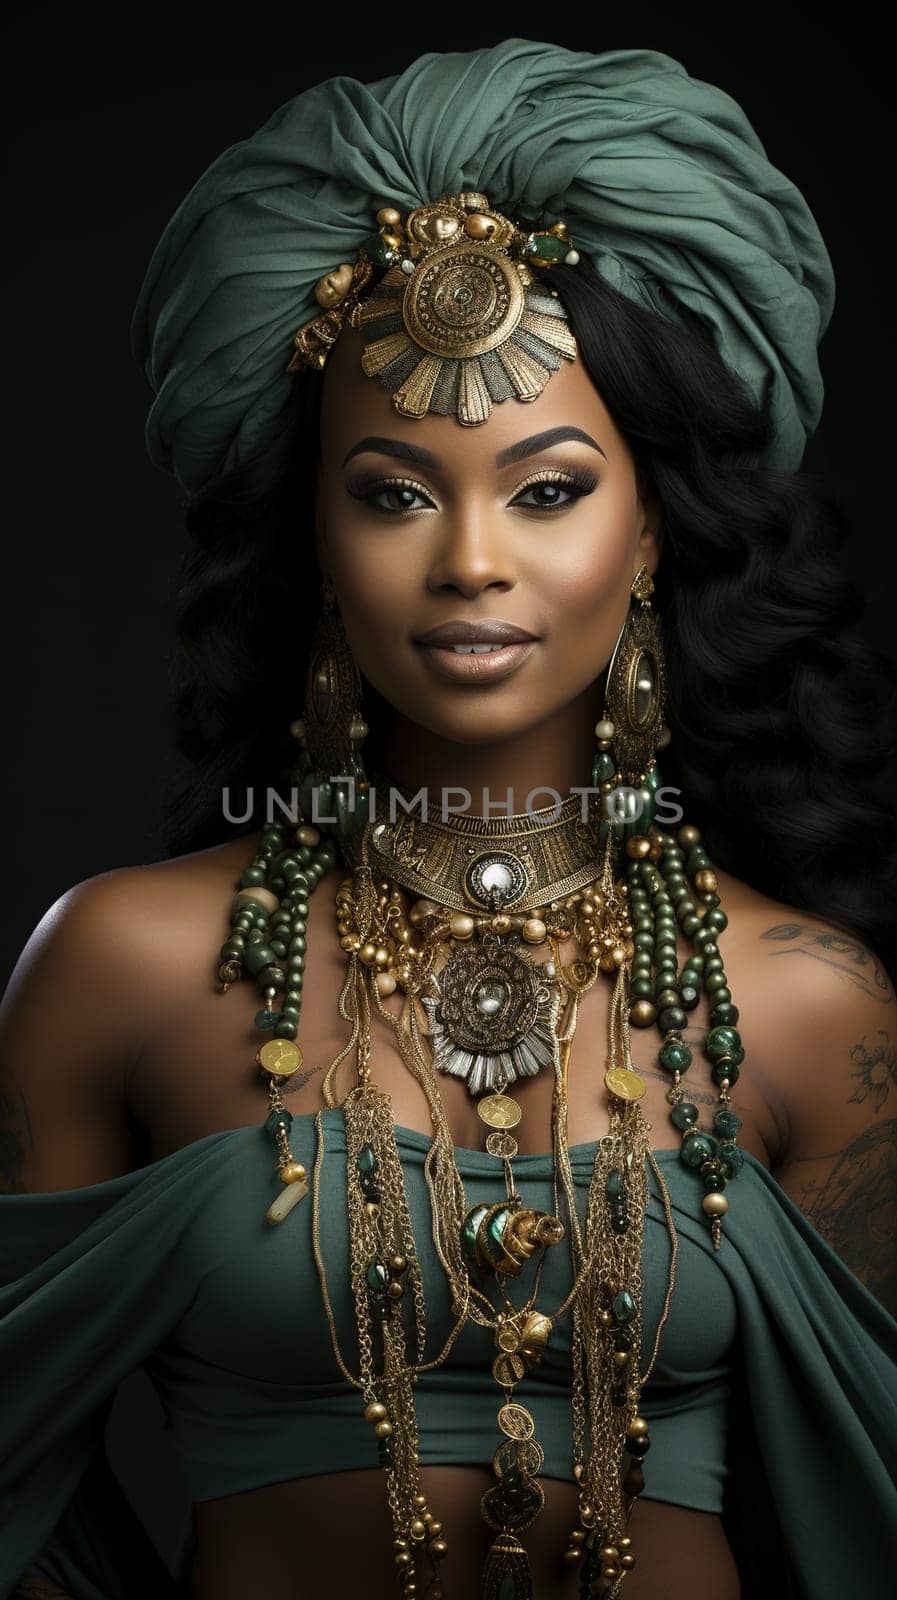 Portrait of a beautiful African woman in a luxurious dark green bejeweled outfit. by Yurich32